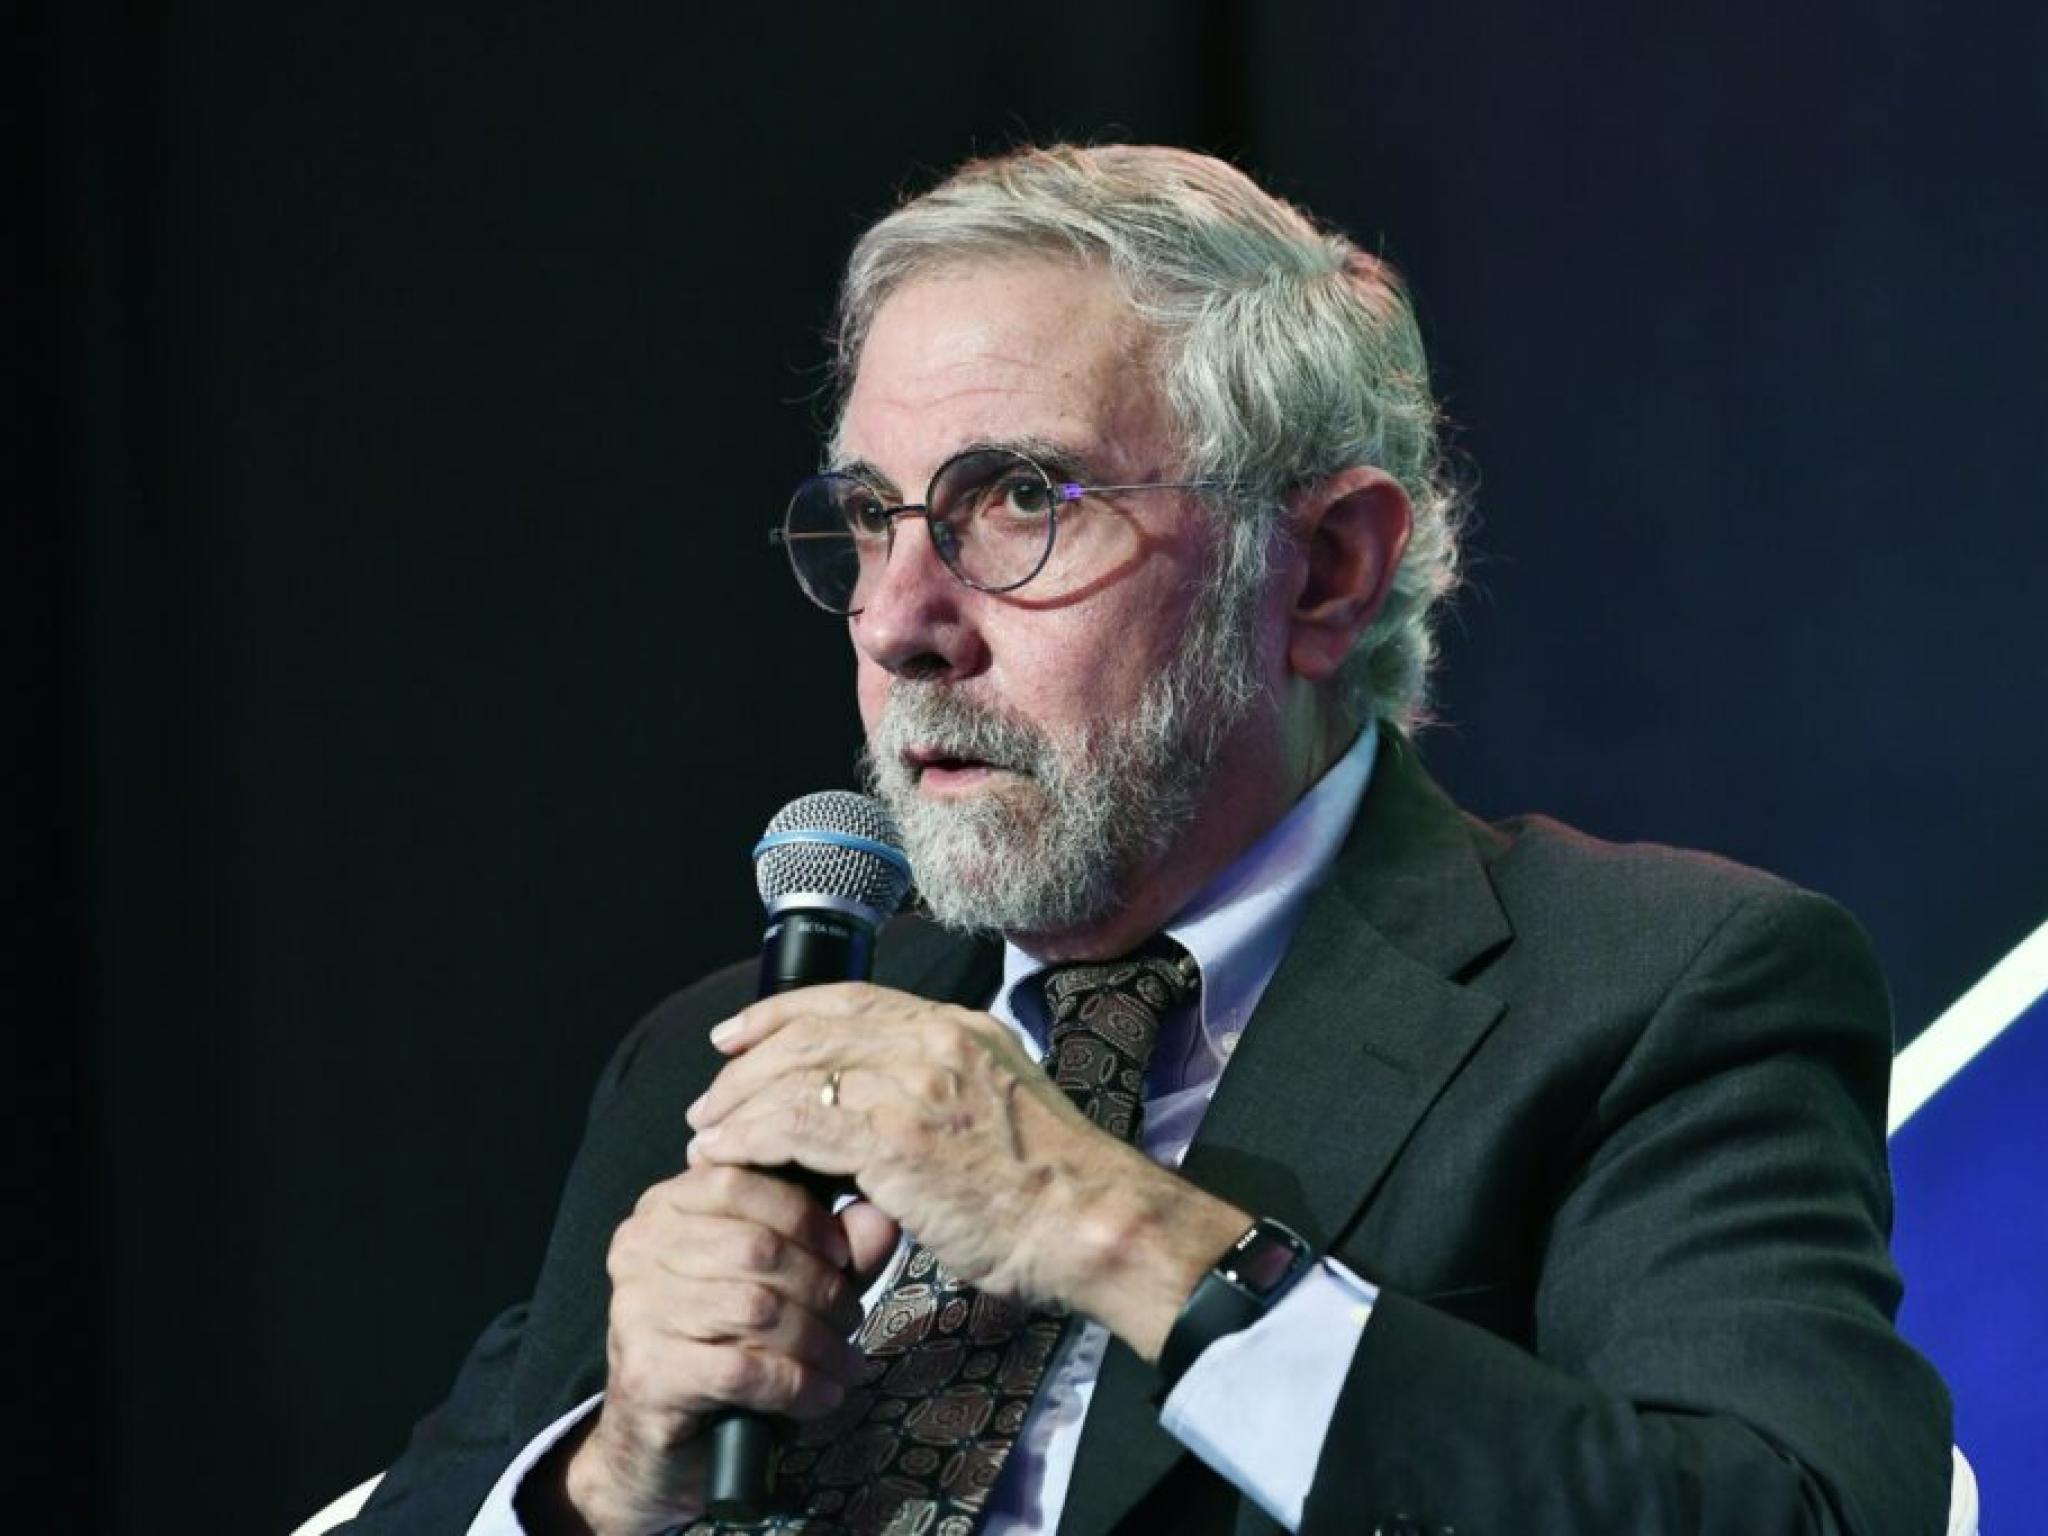  paul-krugman-ridicules-bitcoins-store-of-value-narrative-nobel-winning-economist-makes-a-cheeky-comparison-with-nvidia 